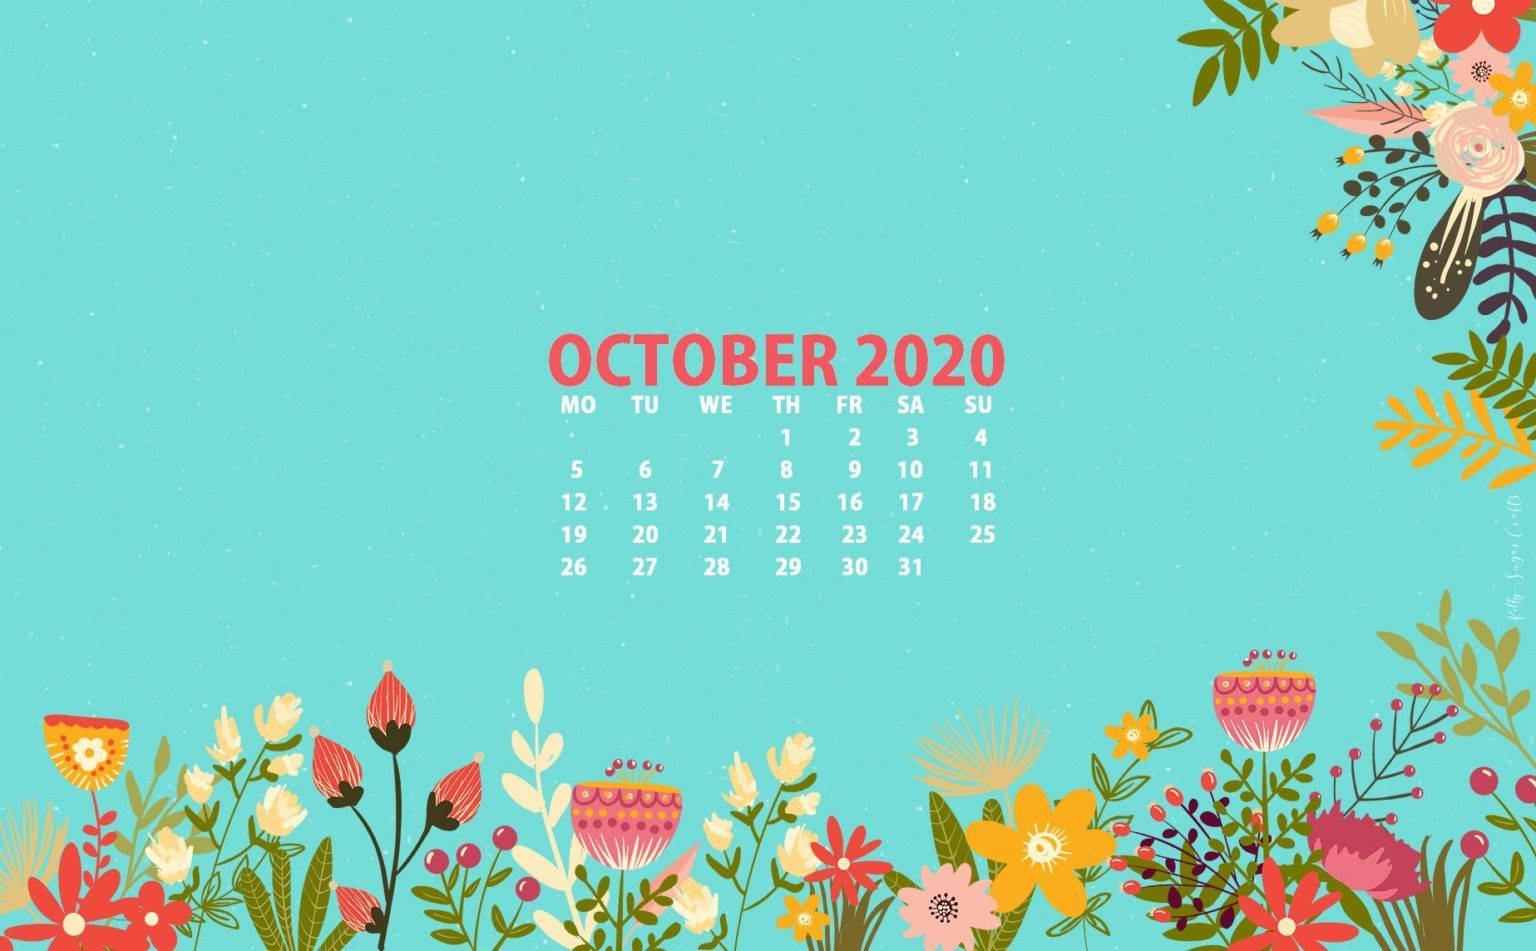 October 2020 Calendar With Flowers And Flowers Wallpaper